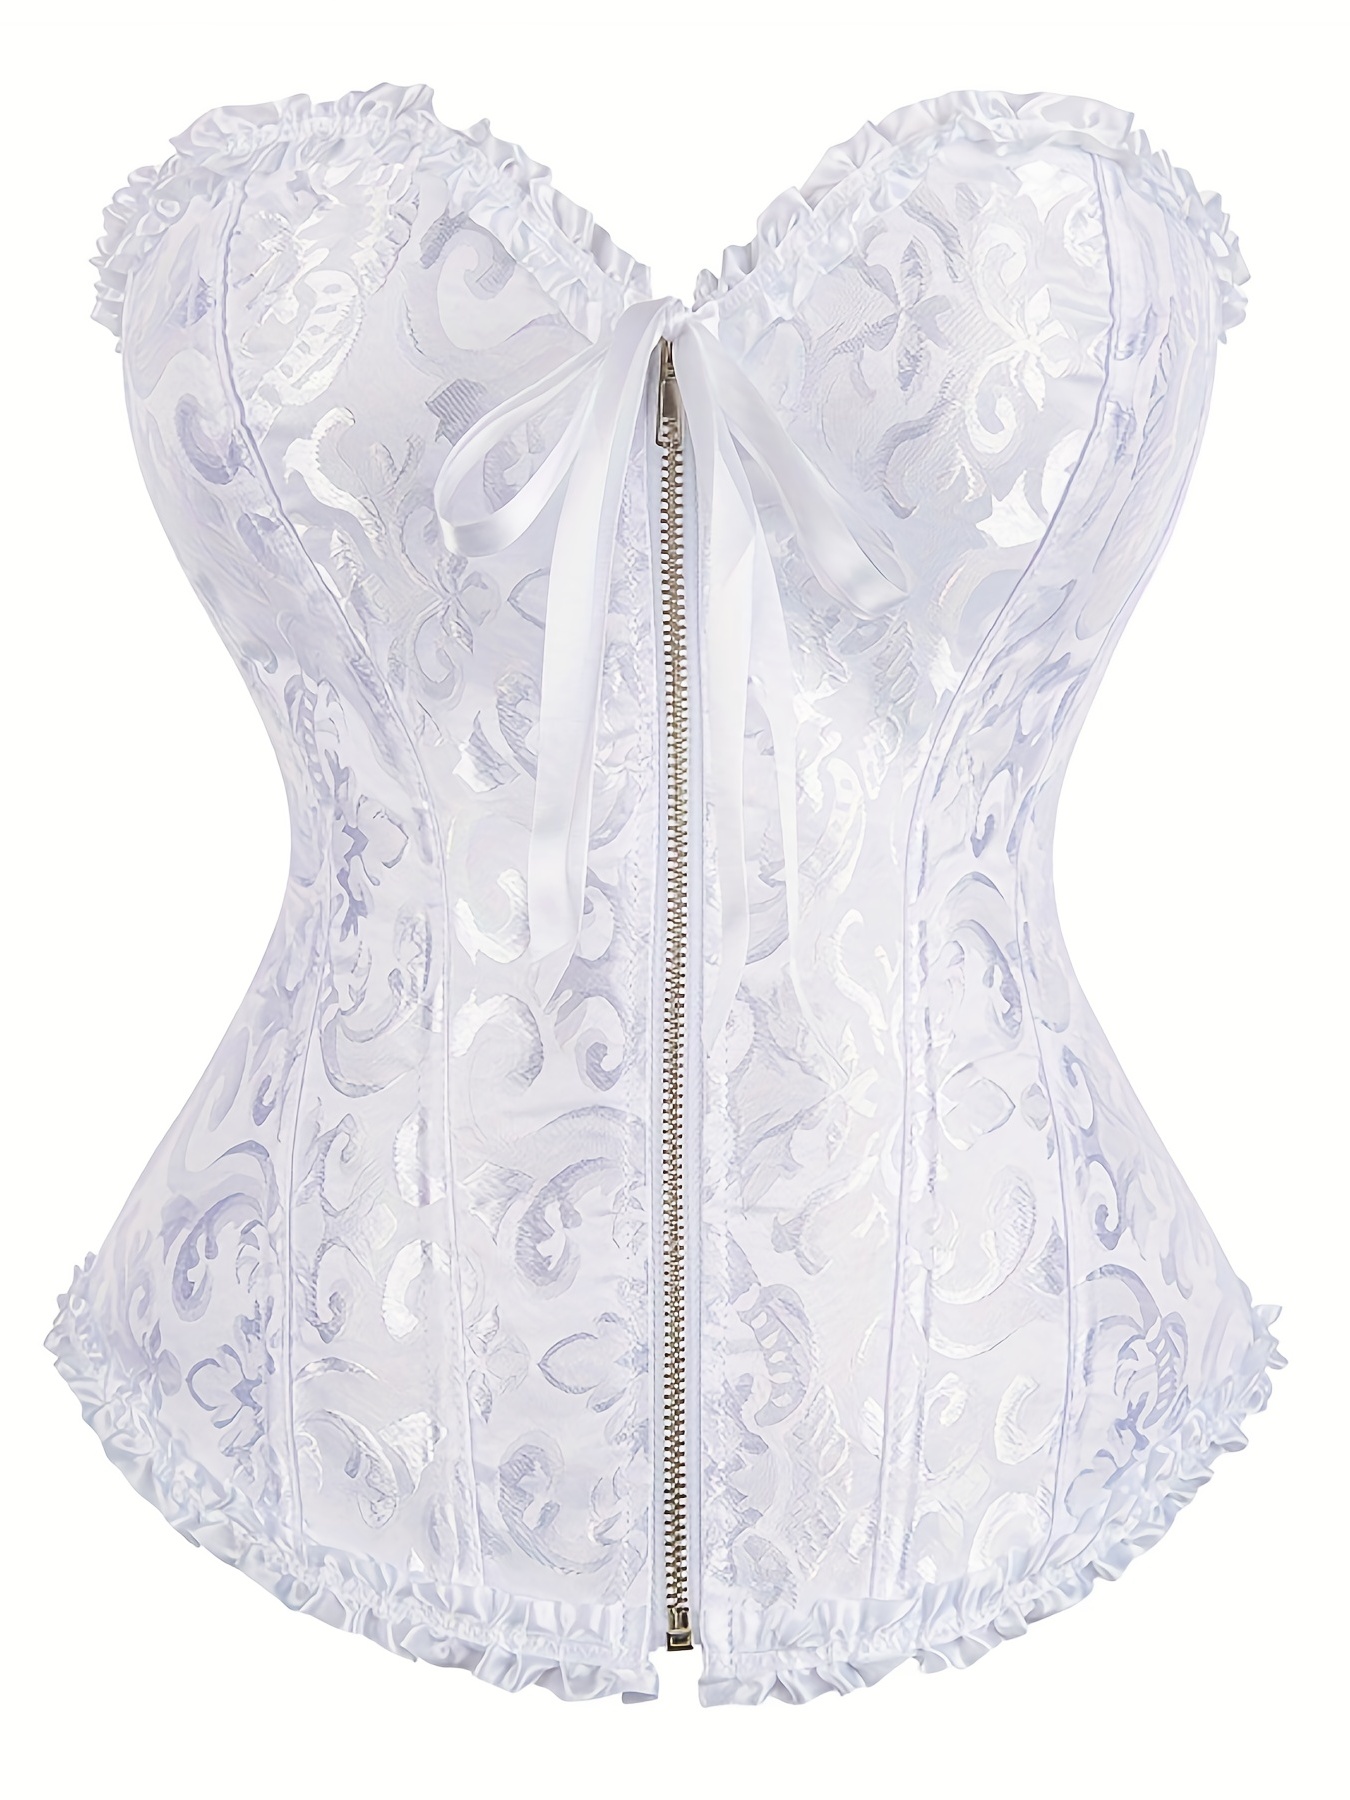 Floral Embroidery Strapless Corset, Push Up Slimming Lace Up Body Shaper,  Women's Lingerie & Shapewear